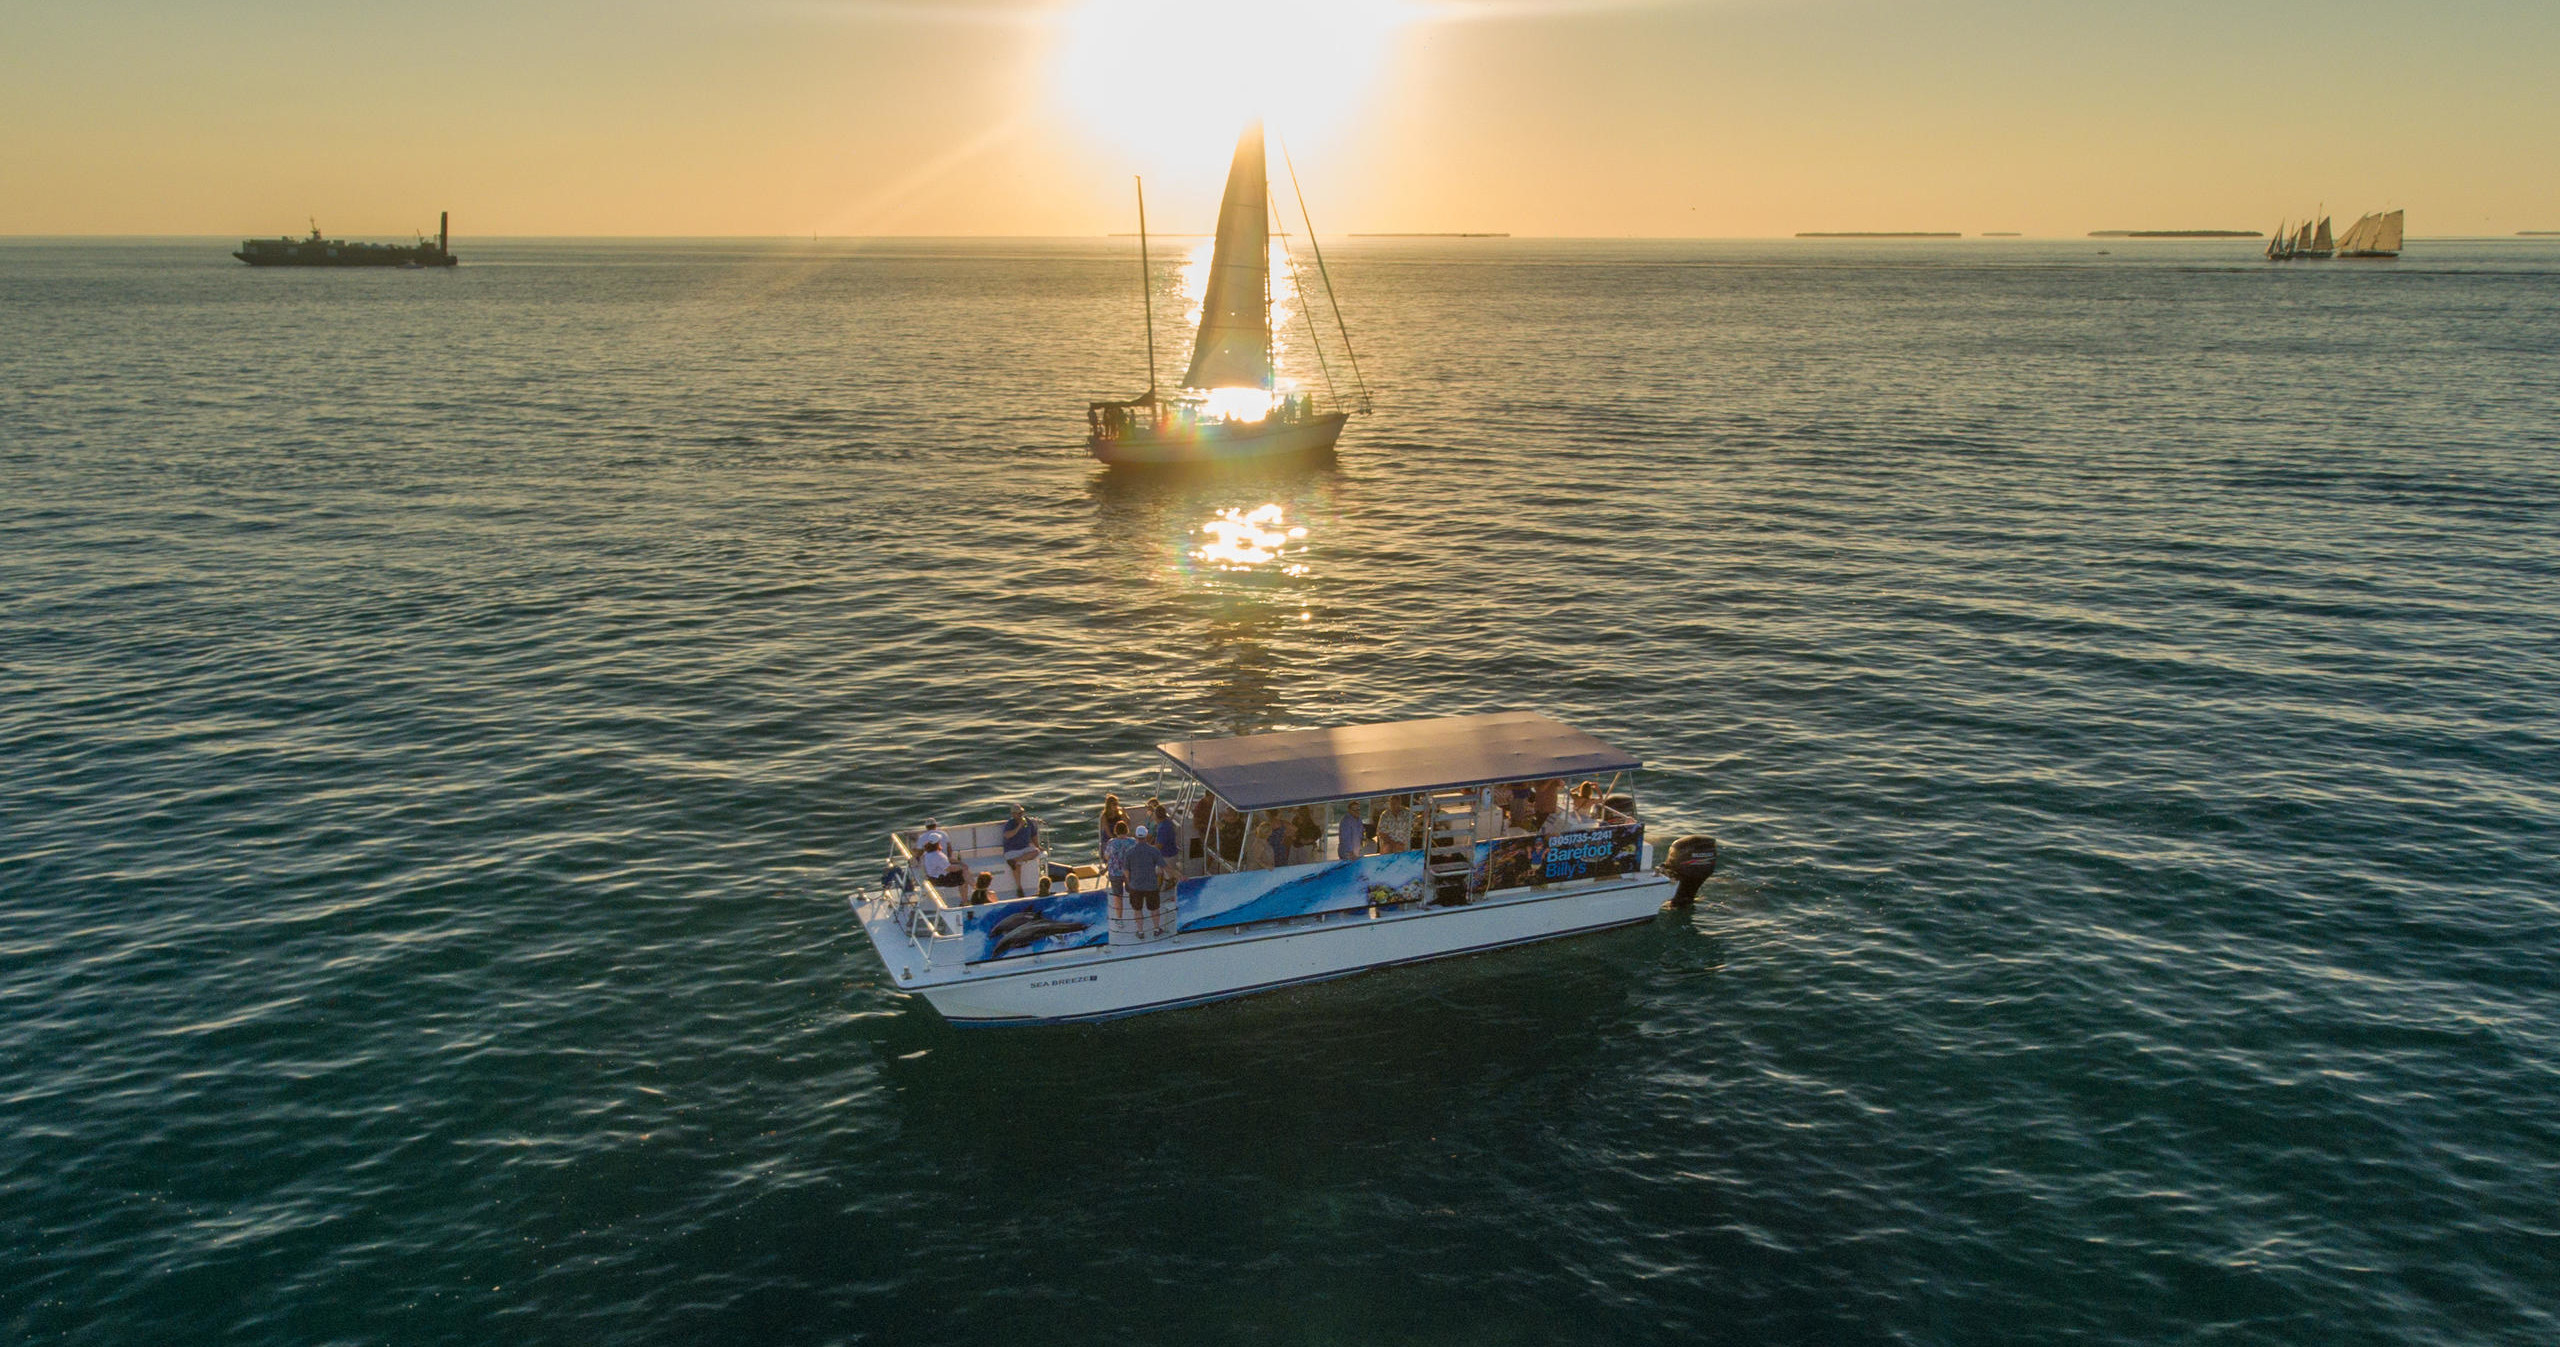 Thumbnail image for Key West Sunset Luxury Party Boat Harbor Cruise With Delicious Hors D’oeuvres & Complementary Drinks